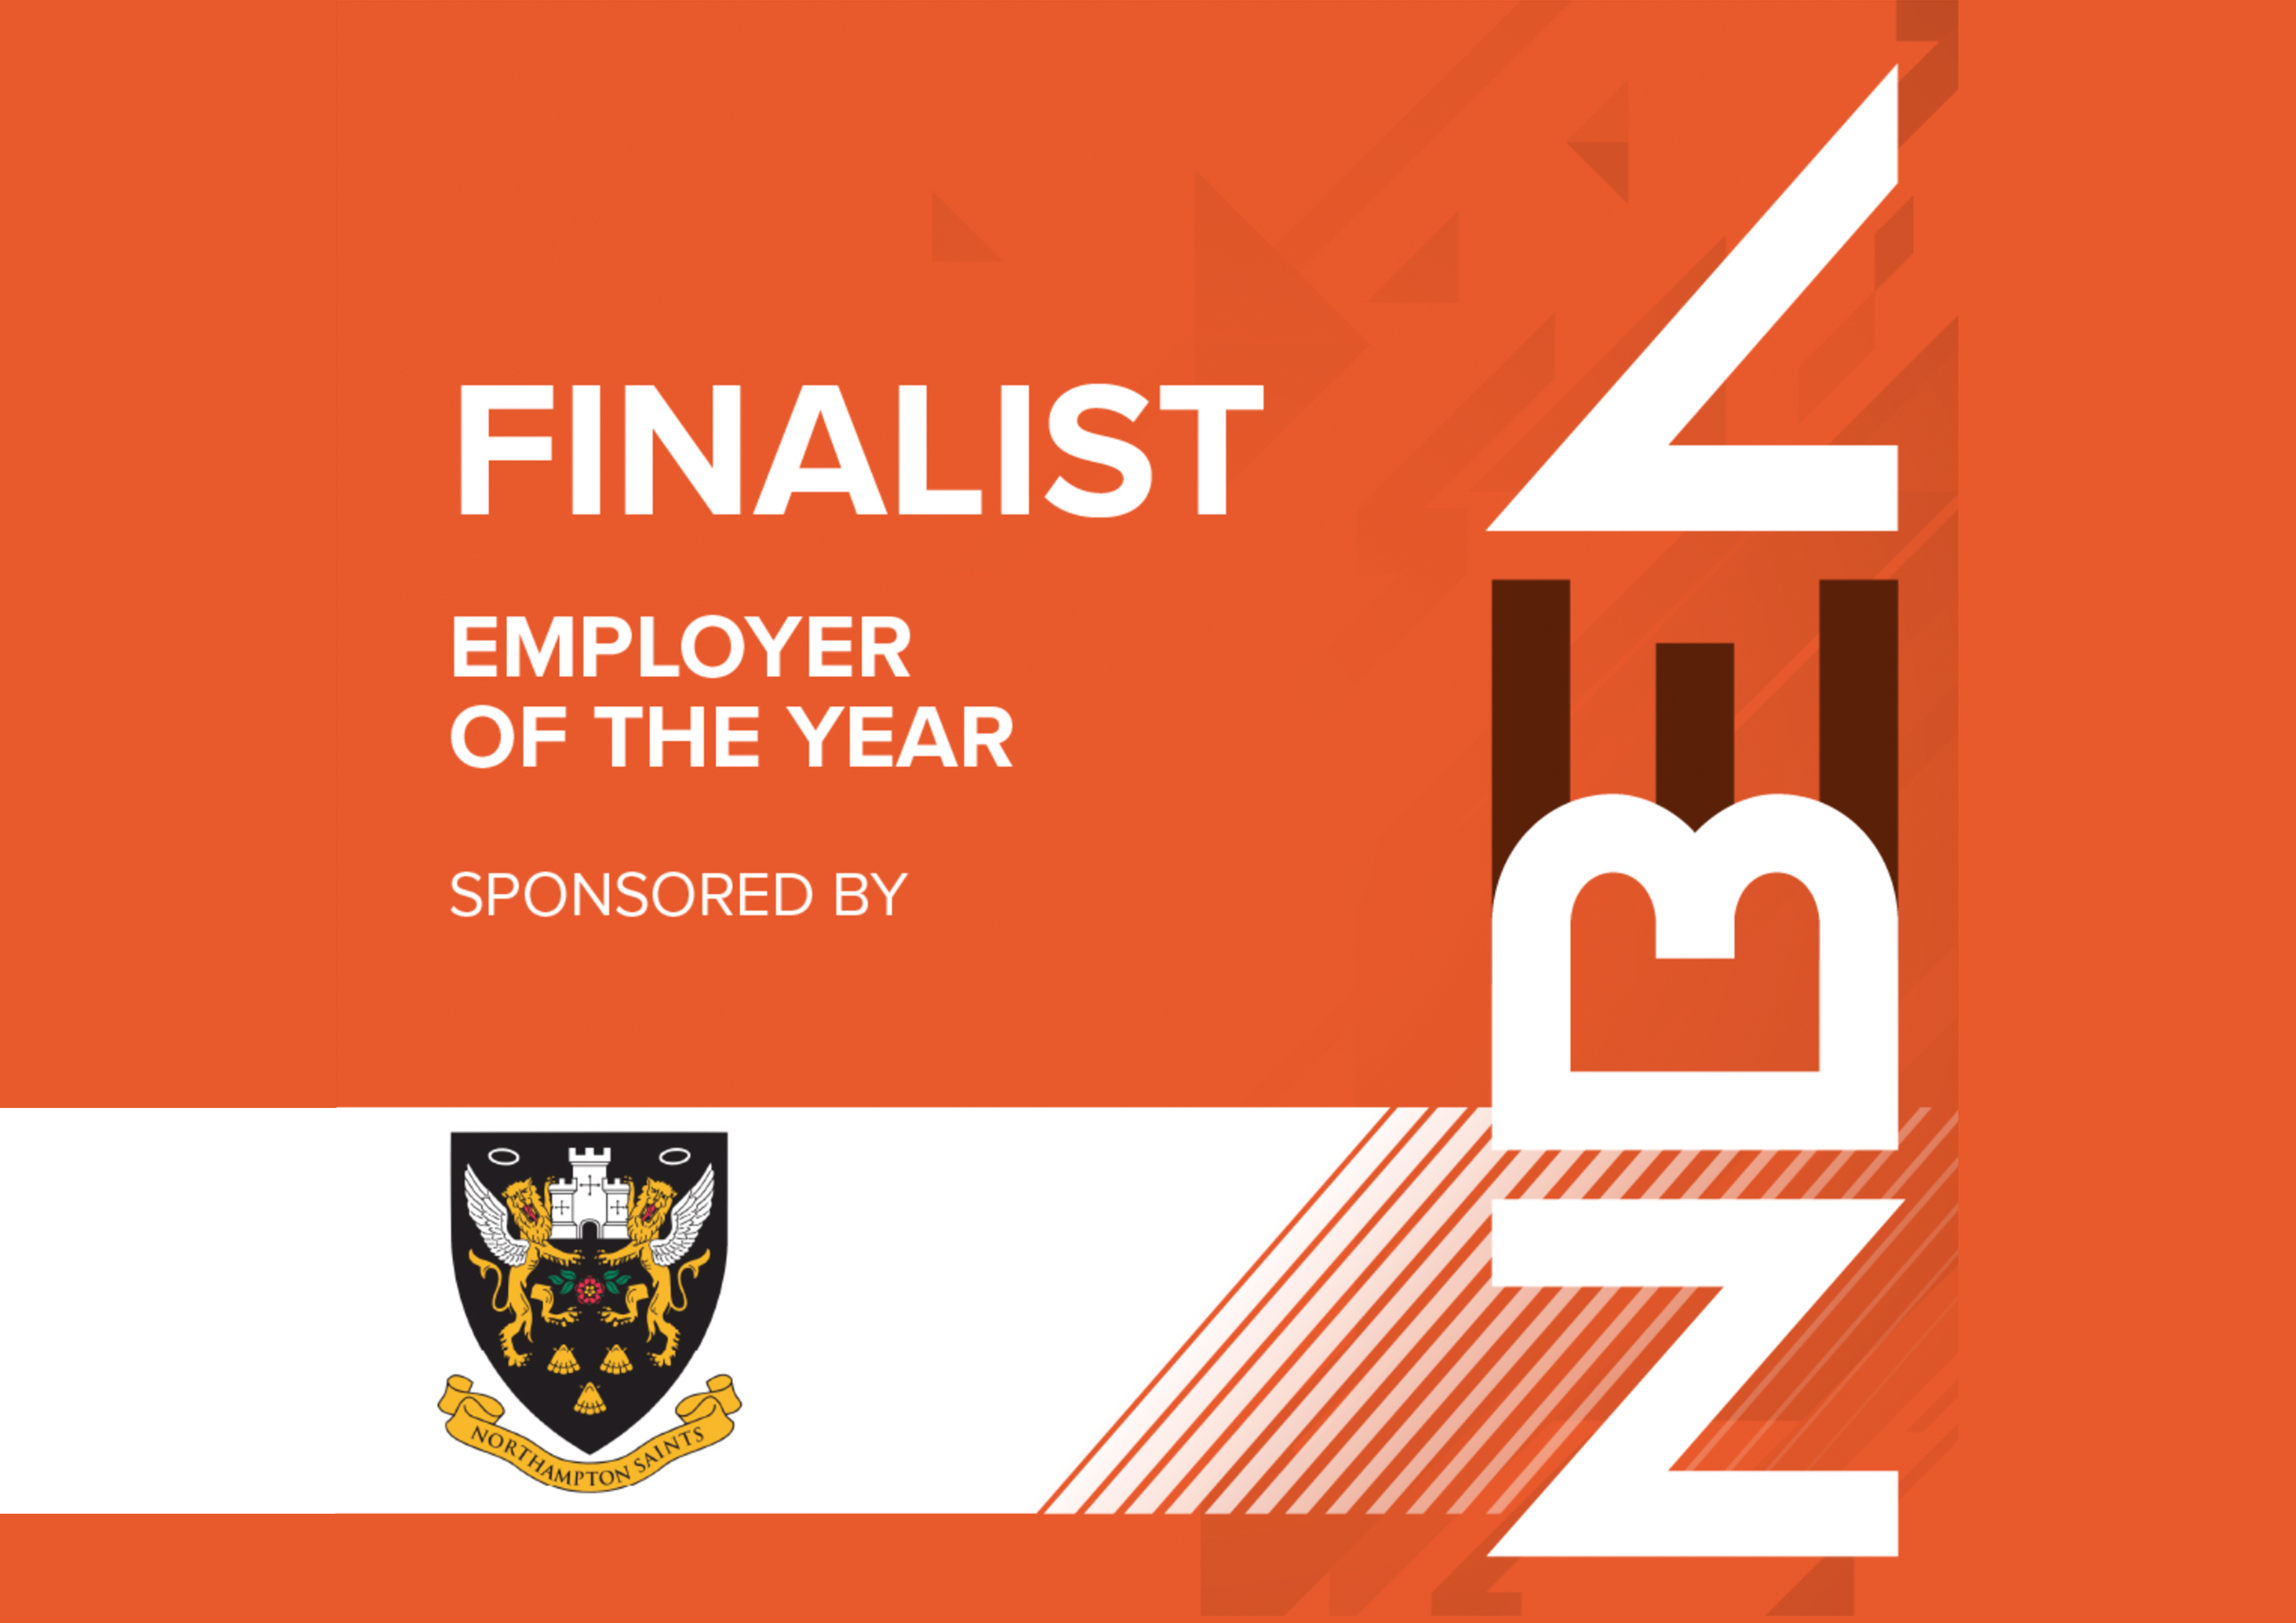 Postworks announced as Employer of the Year finalists for the NBEA